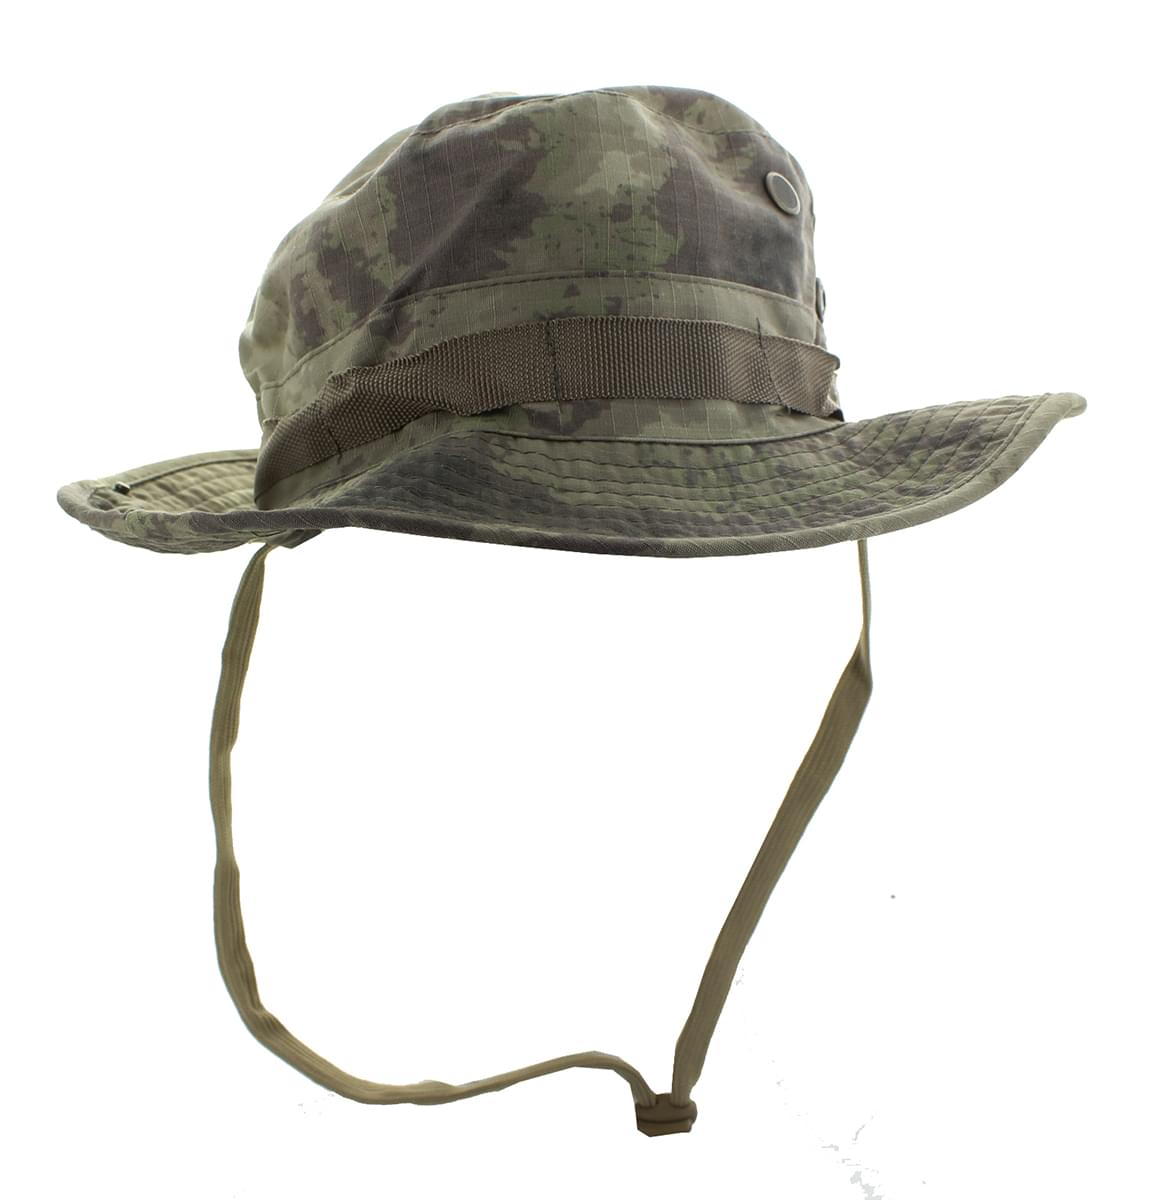 Call of Duty Captain Price Bucket Hat